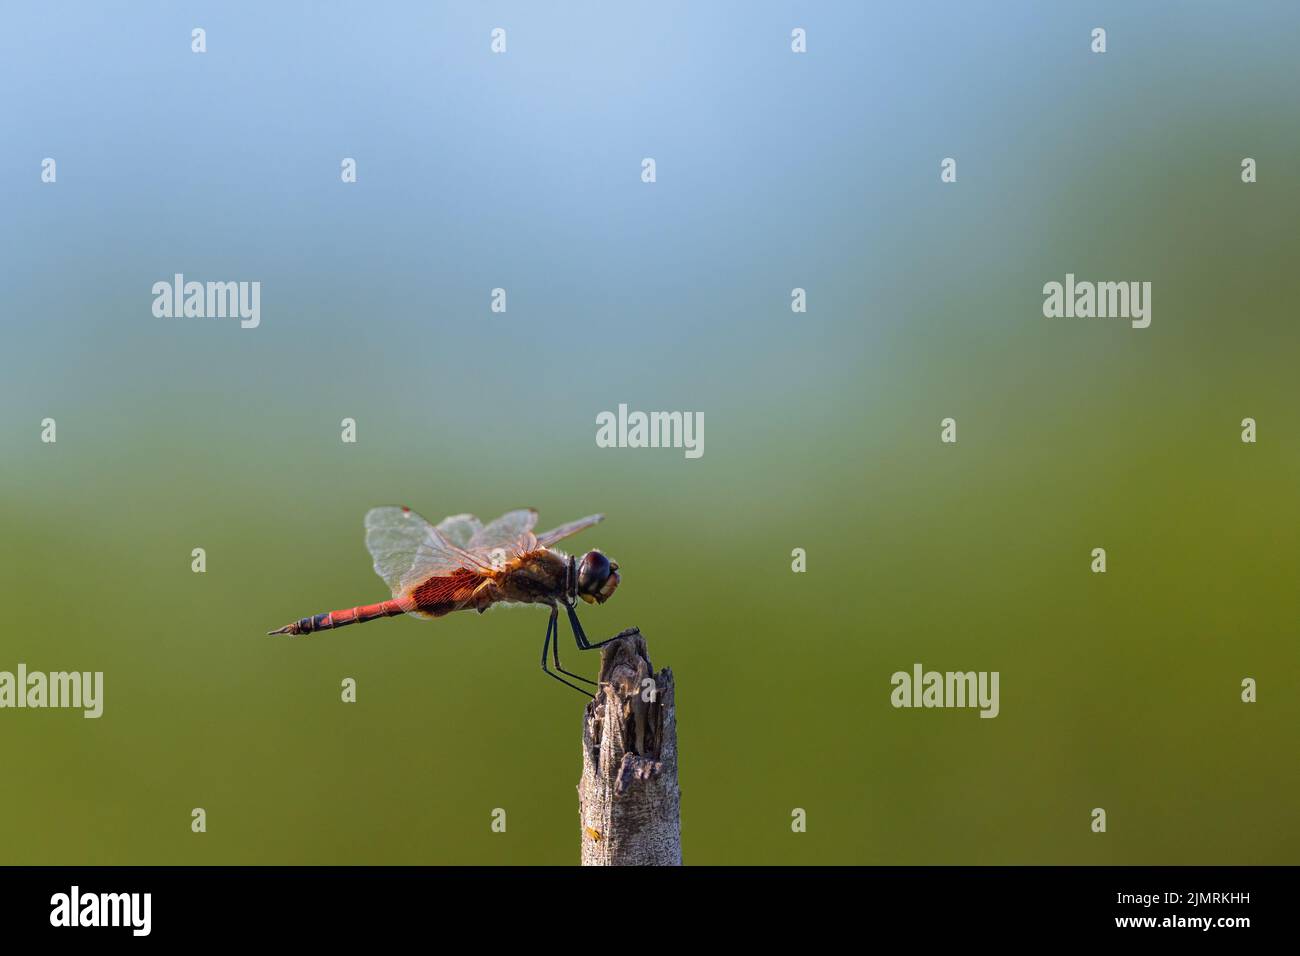 A lone male Common Glider dragonfly rests momentarily on a broken branch before taking flight hawking for insects at St Lawrence, QLD in Australia. Stock Photo